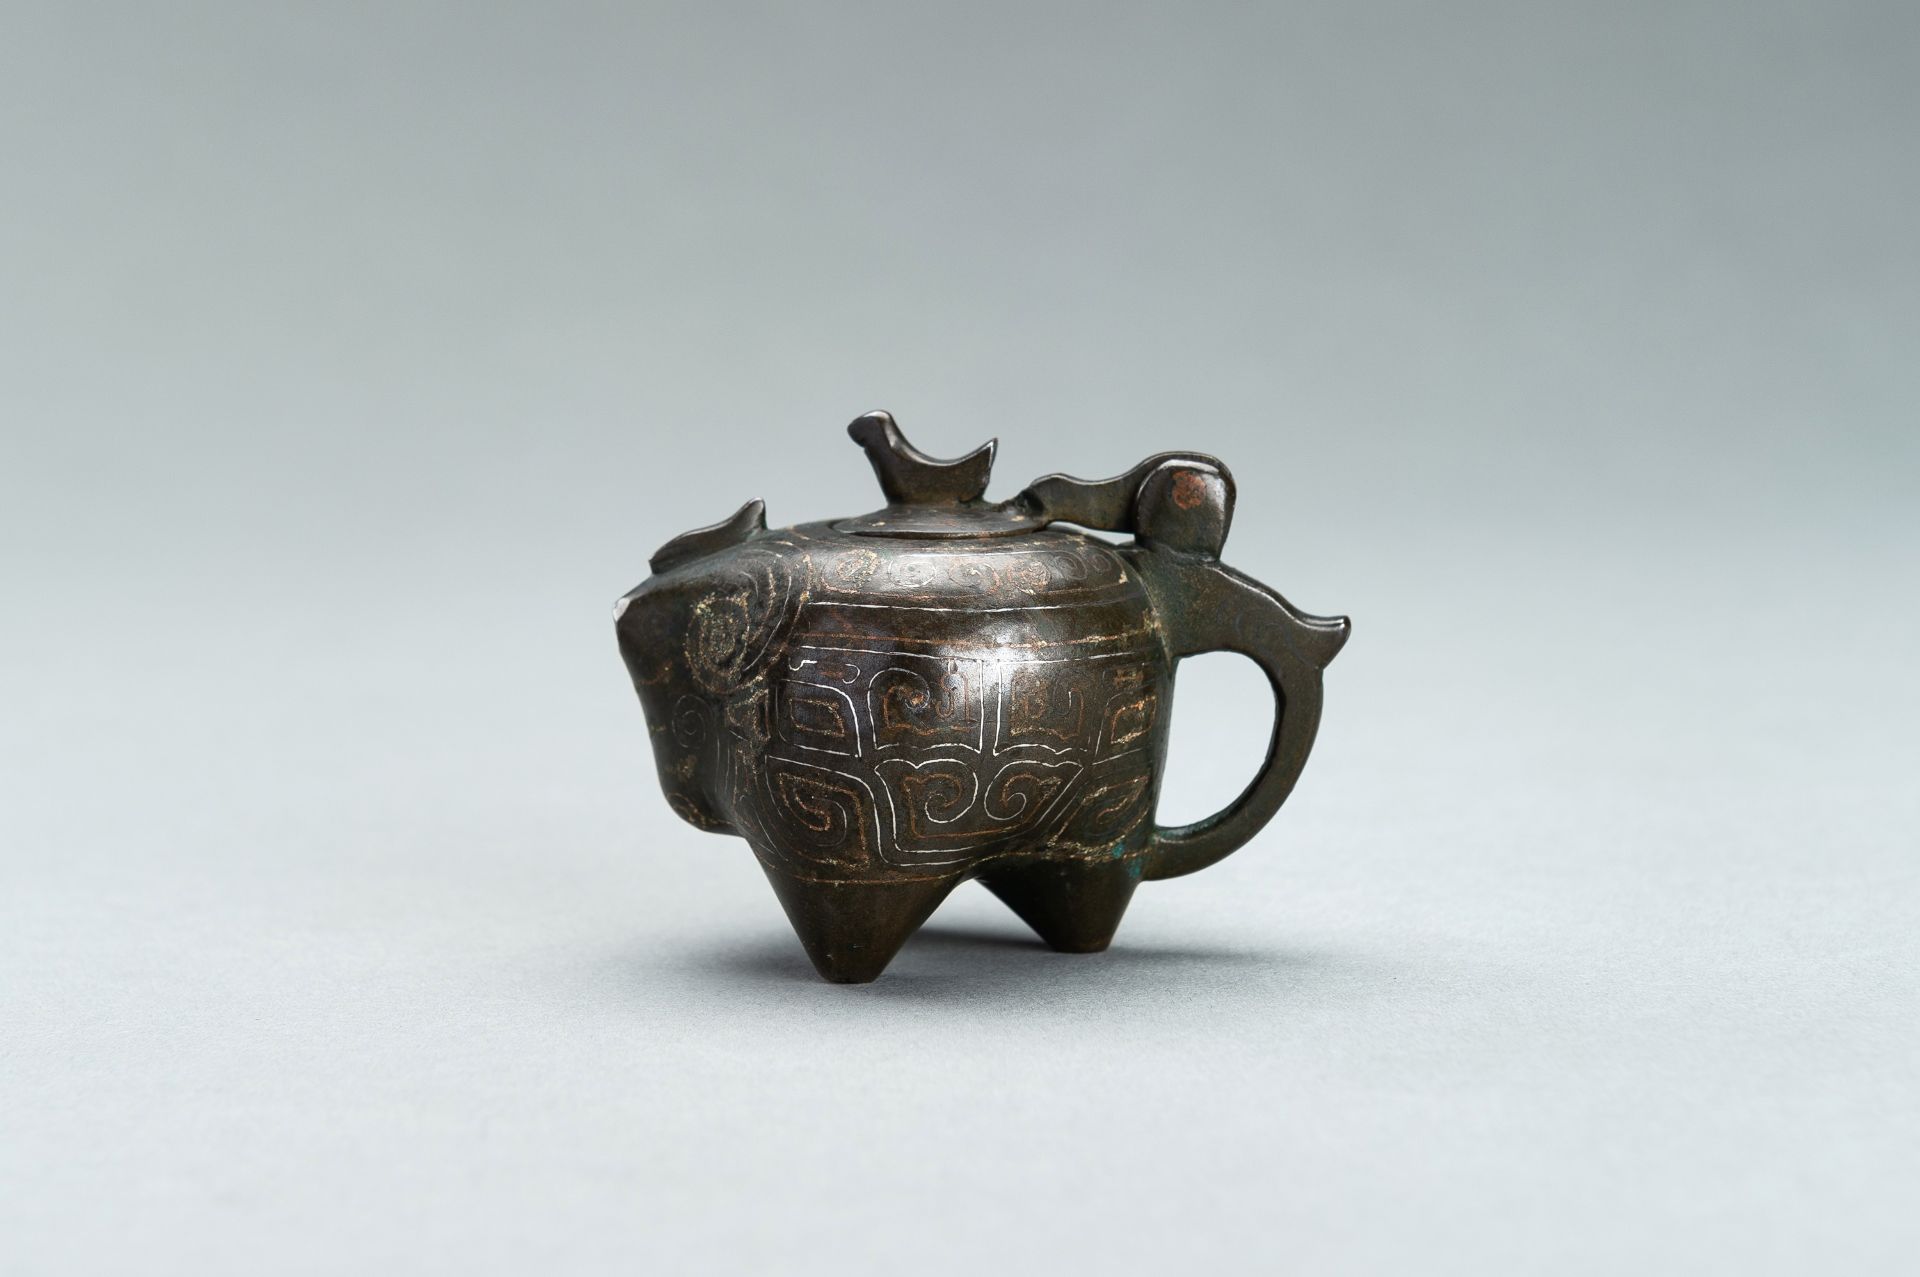 A SMALL COPPER AND SILVER INLAID BRONZE POURING TRIPOD VESSEL IN THE FORM OF AN ANIMAL, 17TH CENTURY - Bild 2 aus 11